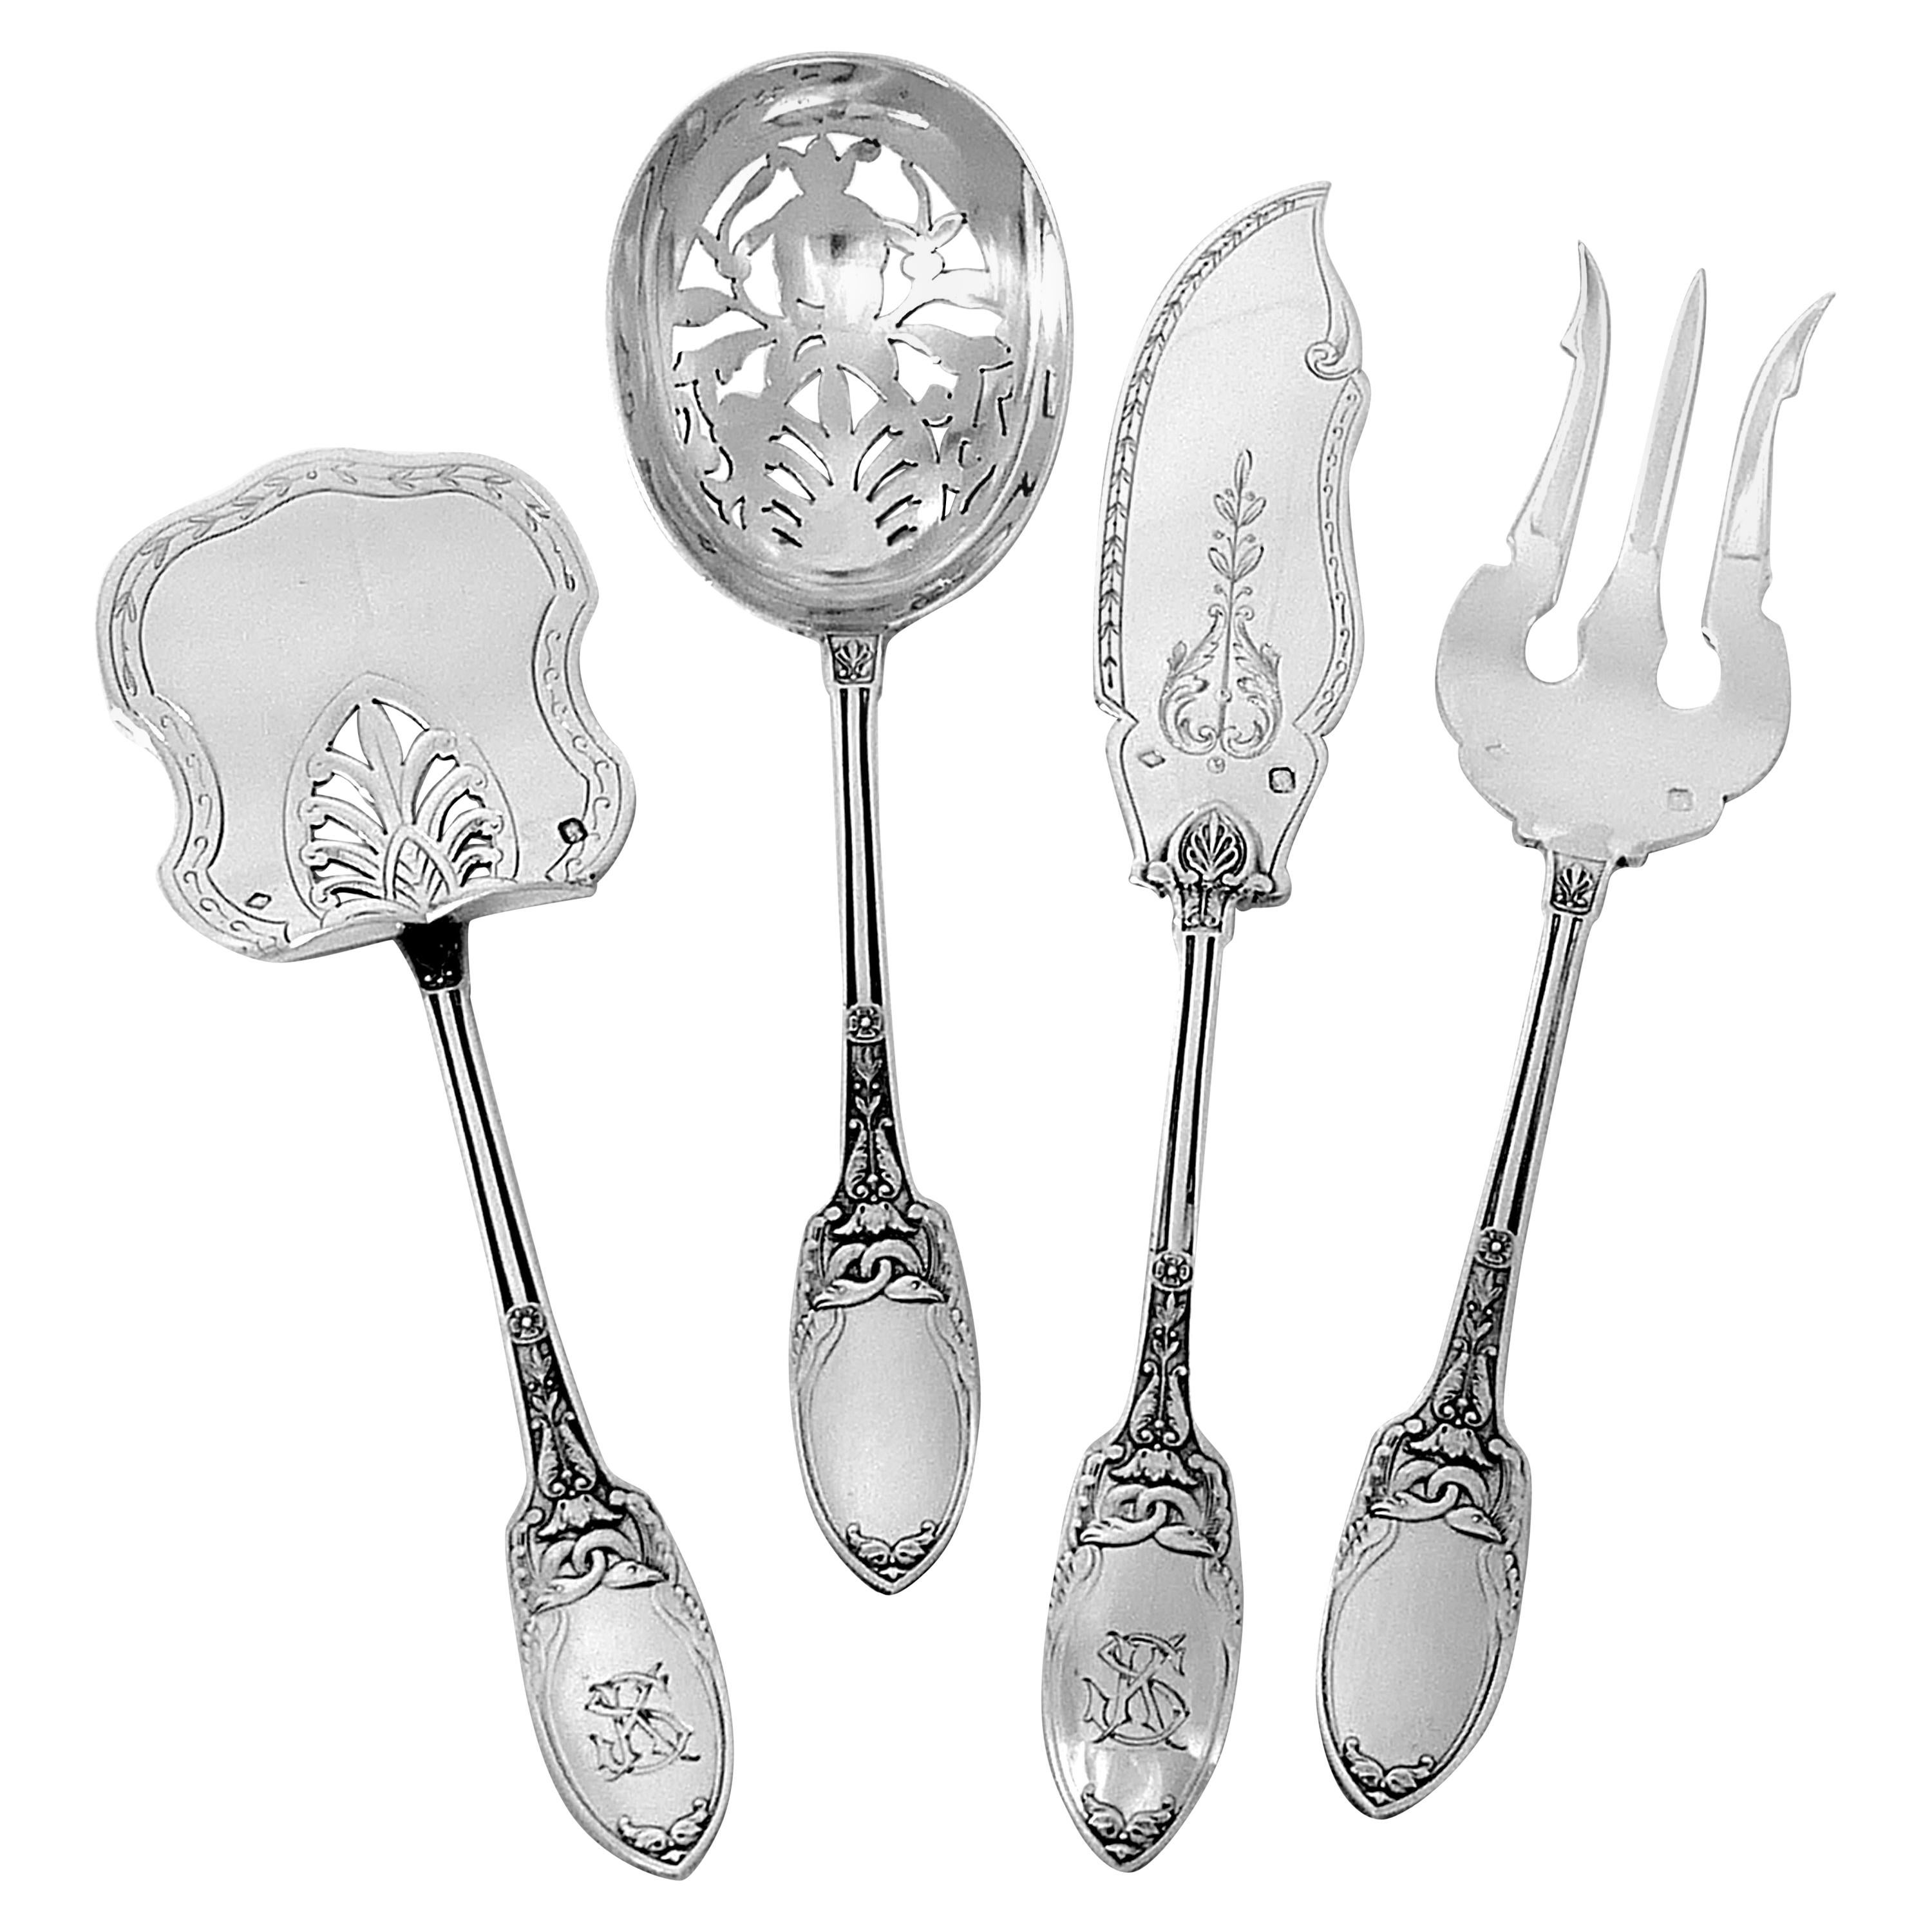 Combeau Rare French All Sterling Silver Dessert Set 4 Pc, Empire, Swans For Sale